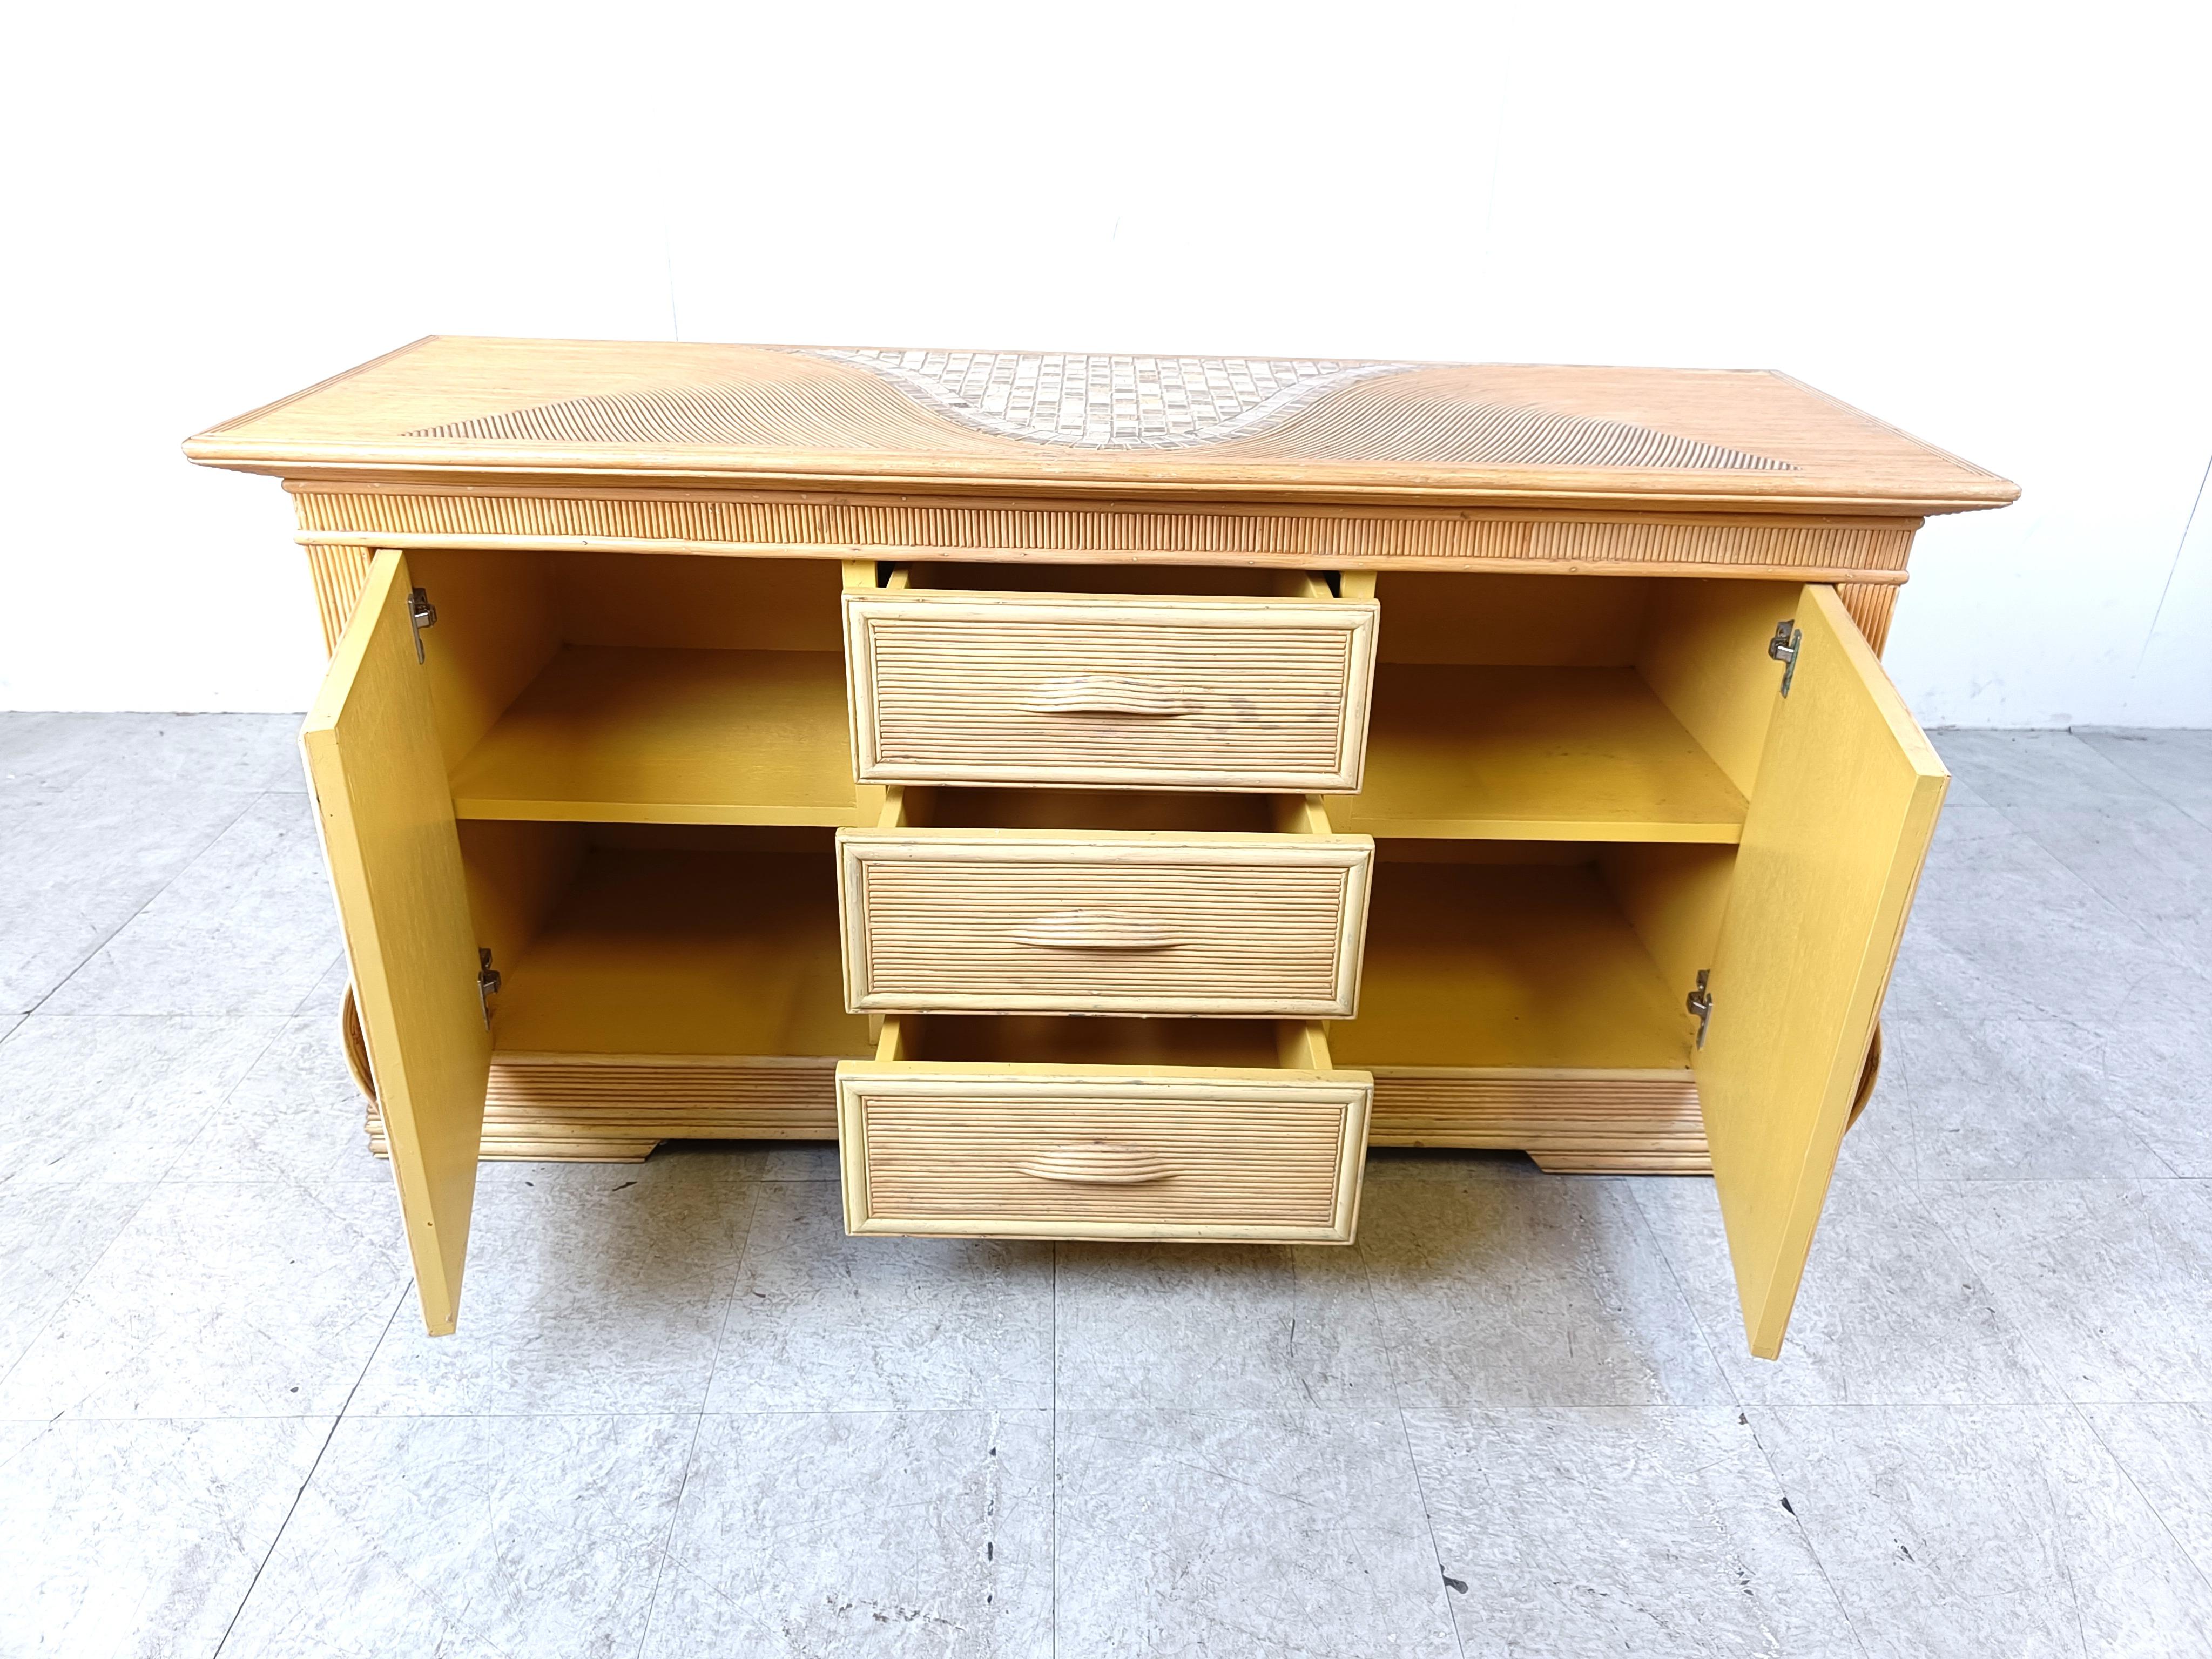 Elegant pencil reed sideboard with 2 doors and 4 drawers

This example is particularly well made with the beautiful bent handles, inlaid ceramic both on top and in the doors and the nice pattern running troughout.

Good condition.

1970s -